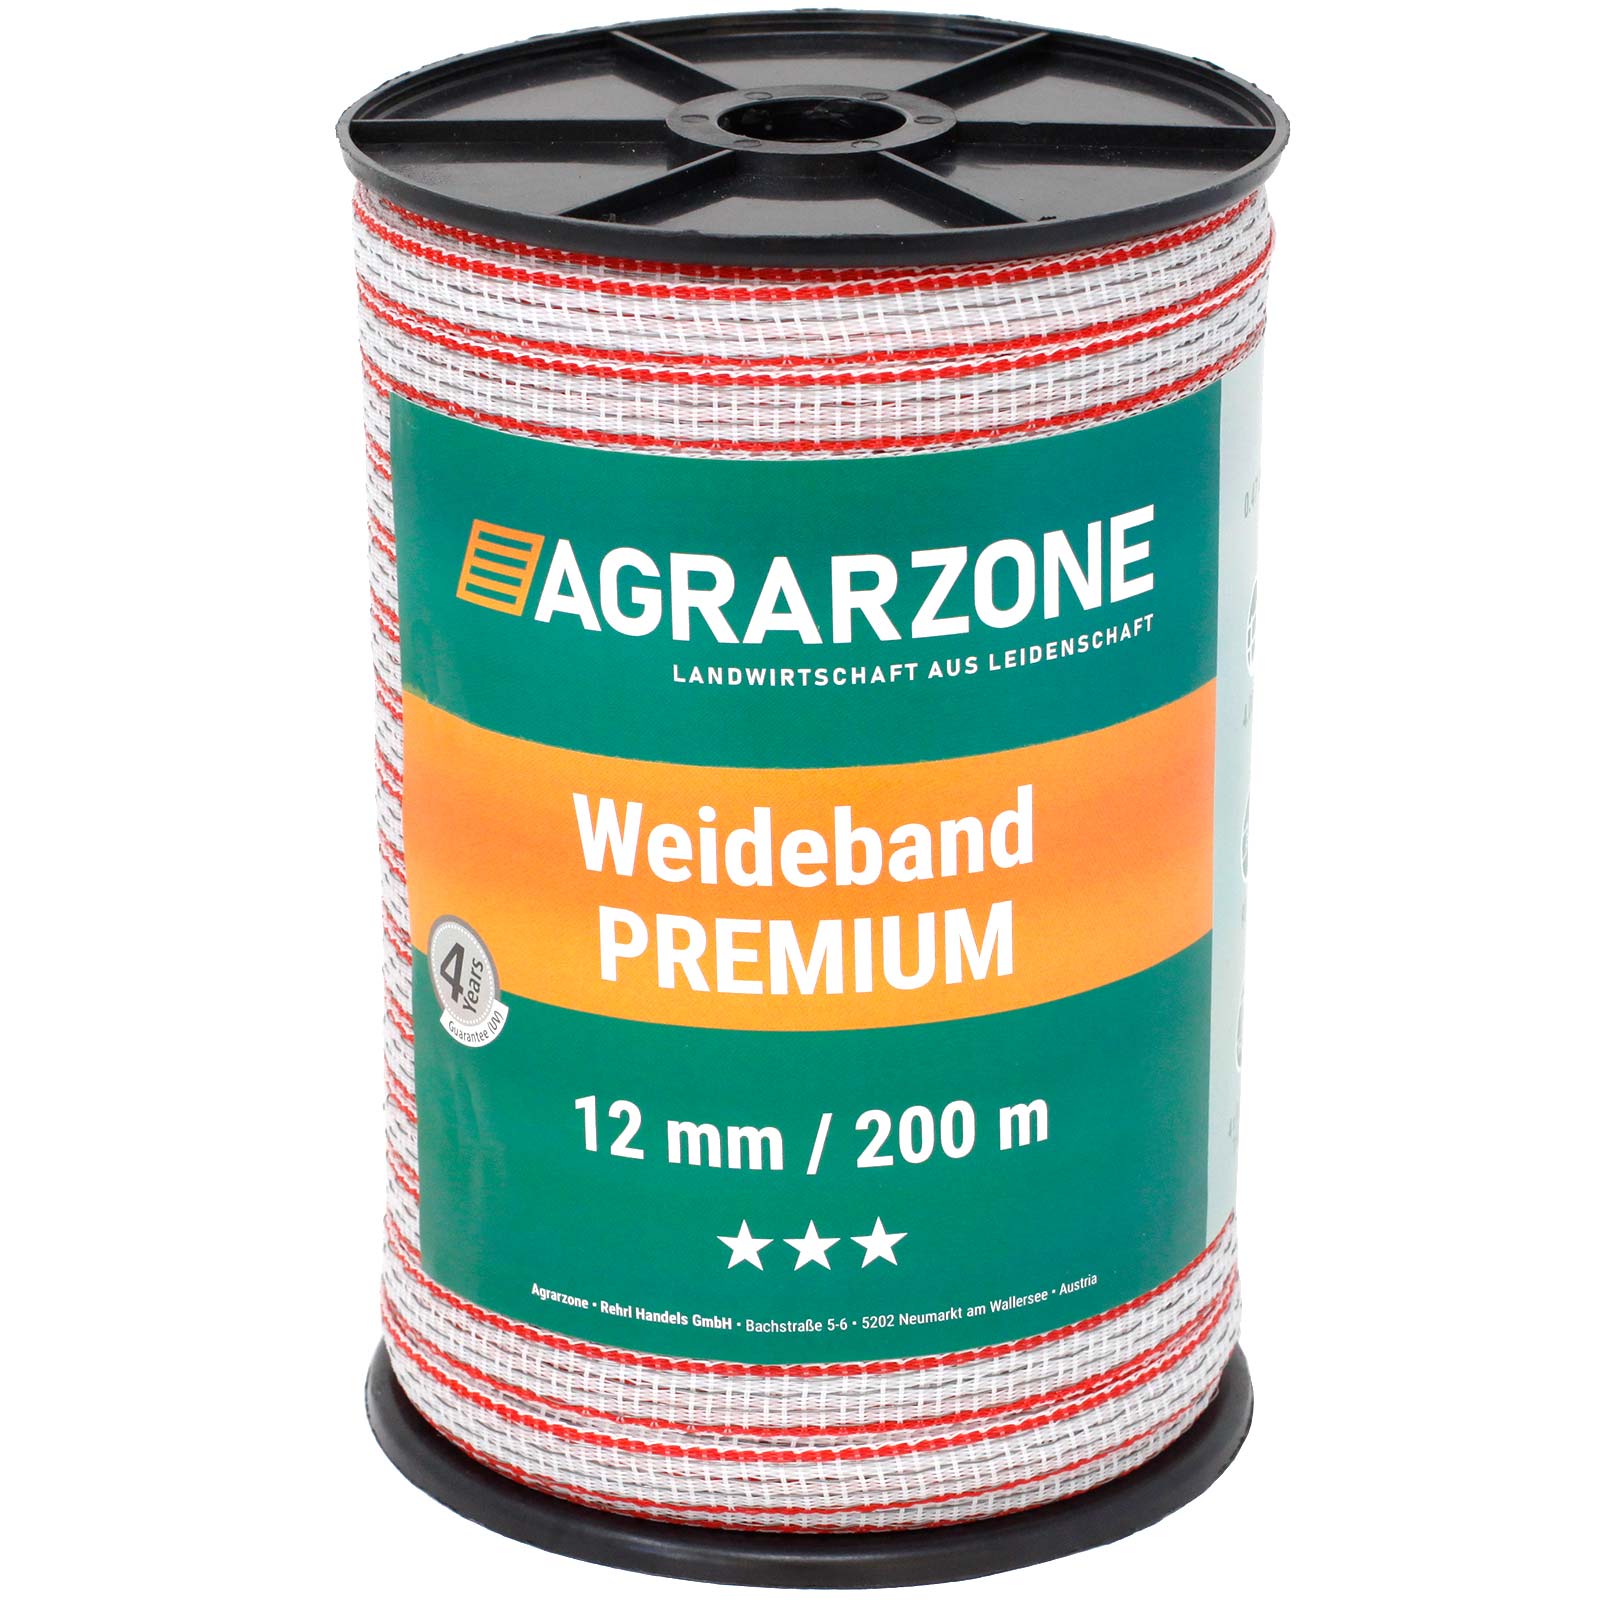 Agrarzone Pasture Fence Tape Premium 0.30 TriCOND, white-red 200 m x 12 mm